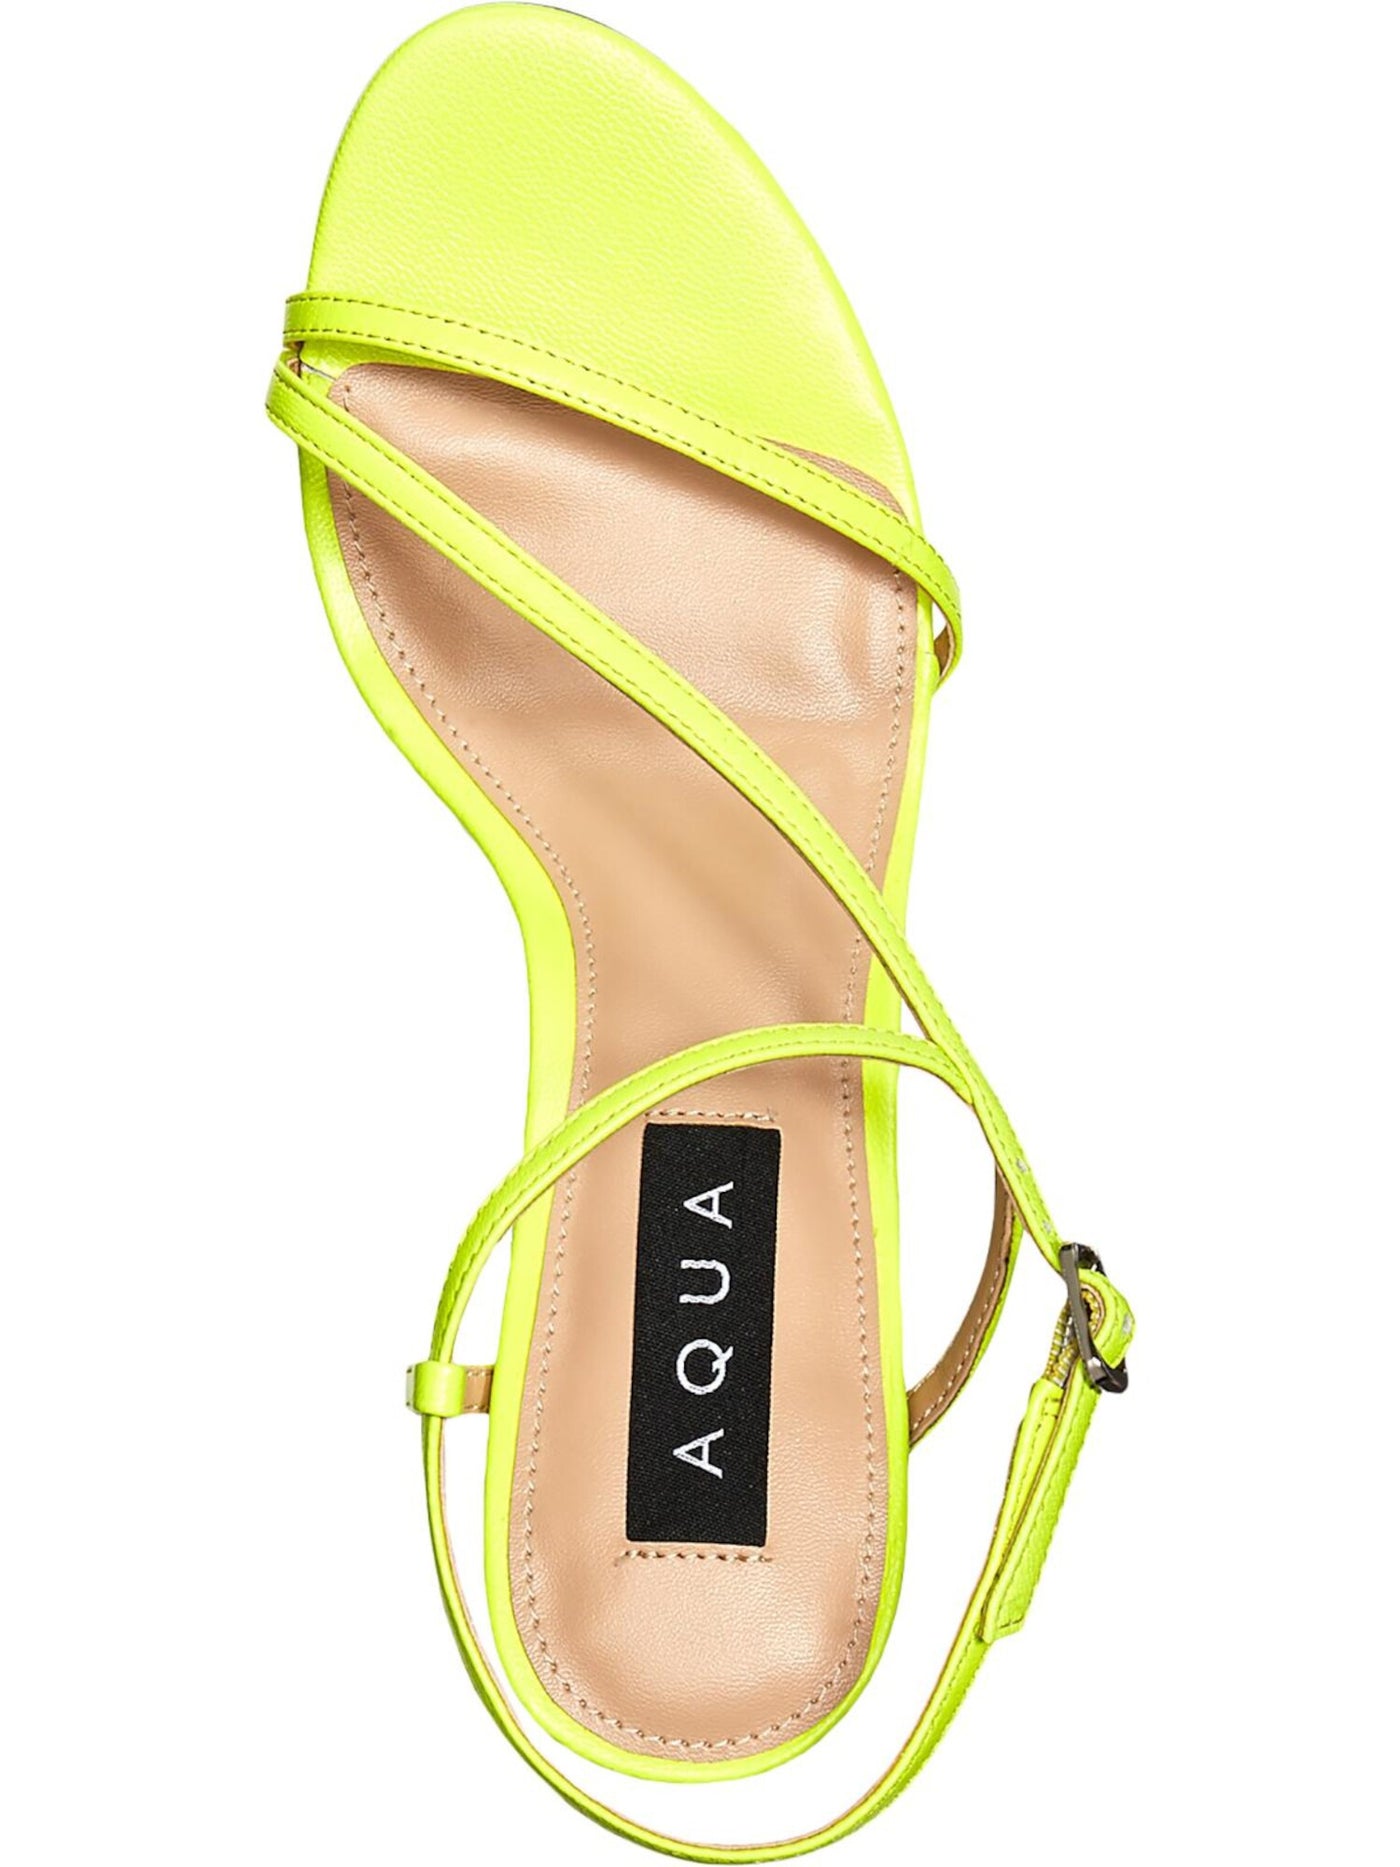 AQUA Womens Yellow Strappy Padded Ron Round Toe Stiletto Buckle Leather Slingback Sandal 10 M